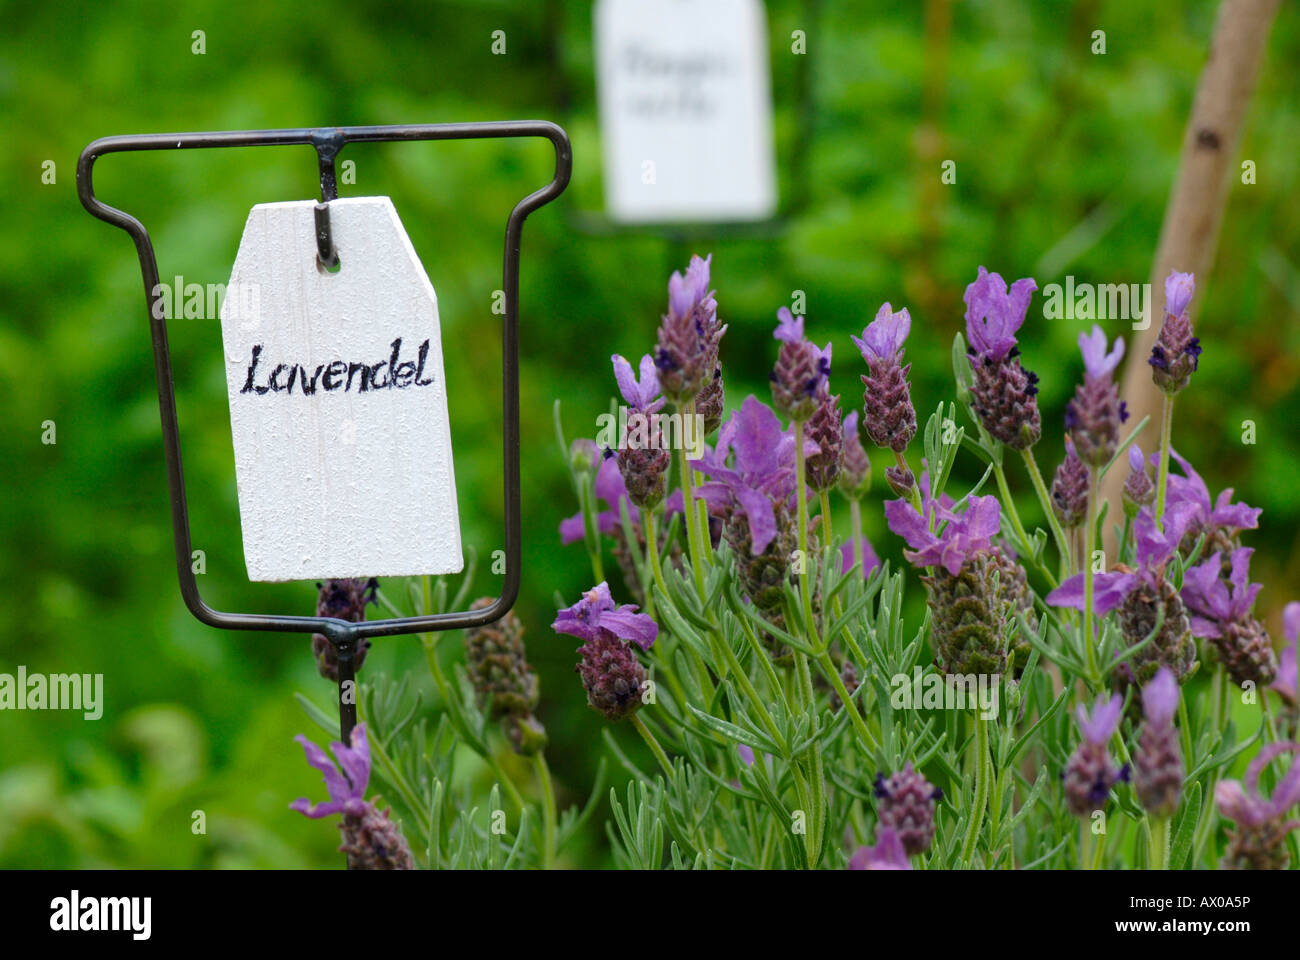 Sign reading 'Lavendel' (lavender) next to lavender plants in an herb garden Stock Photo